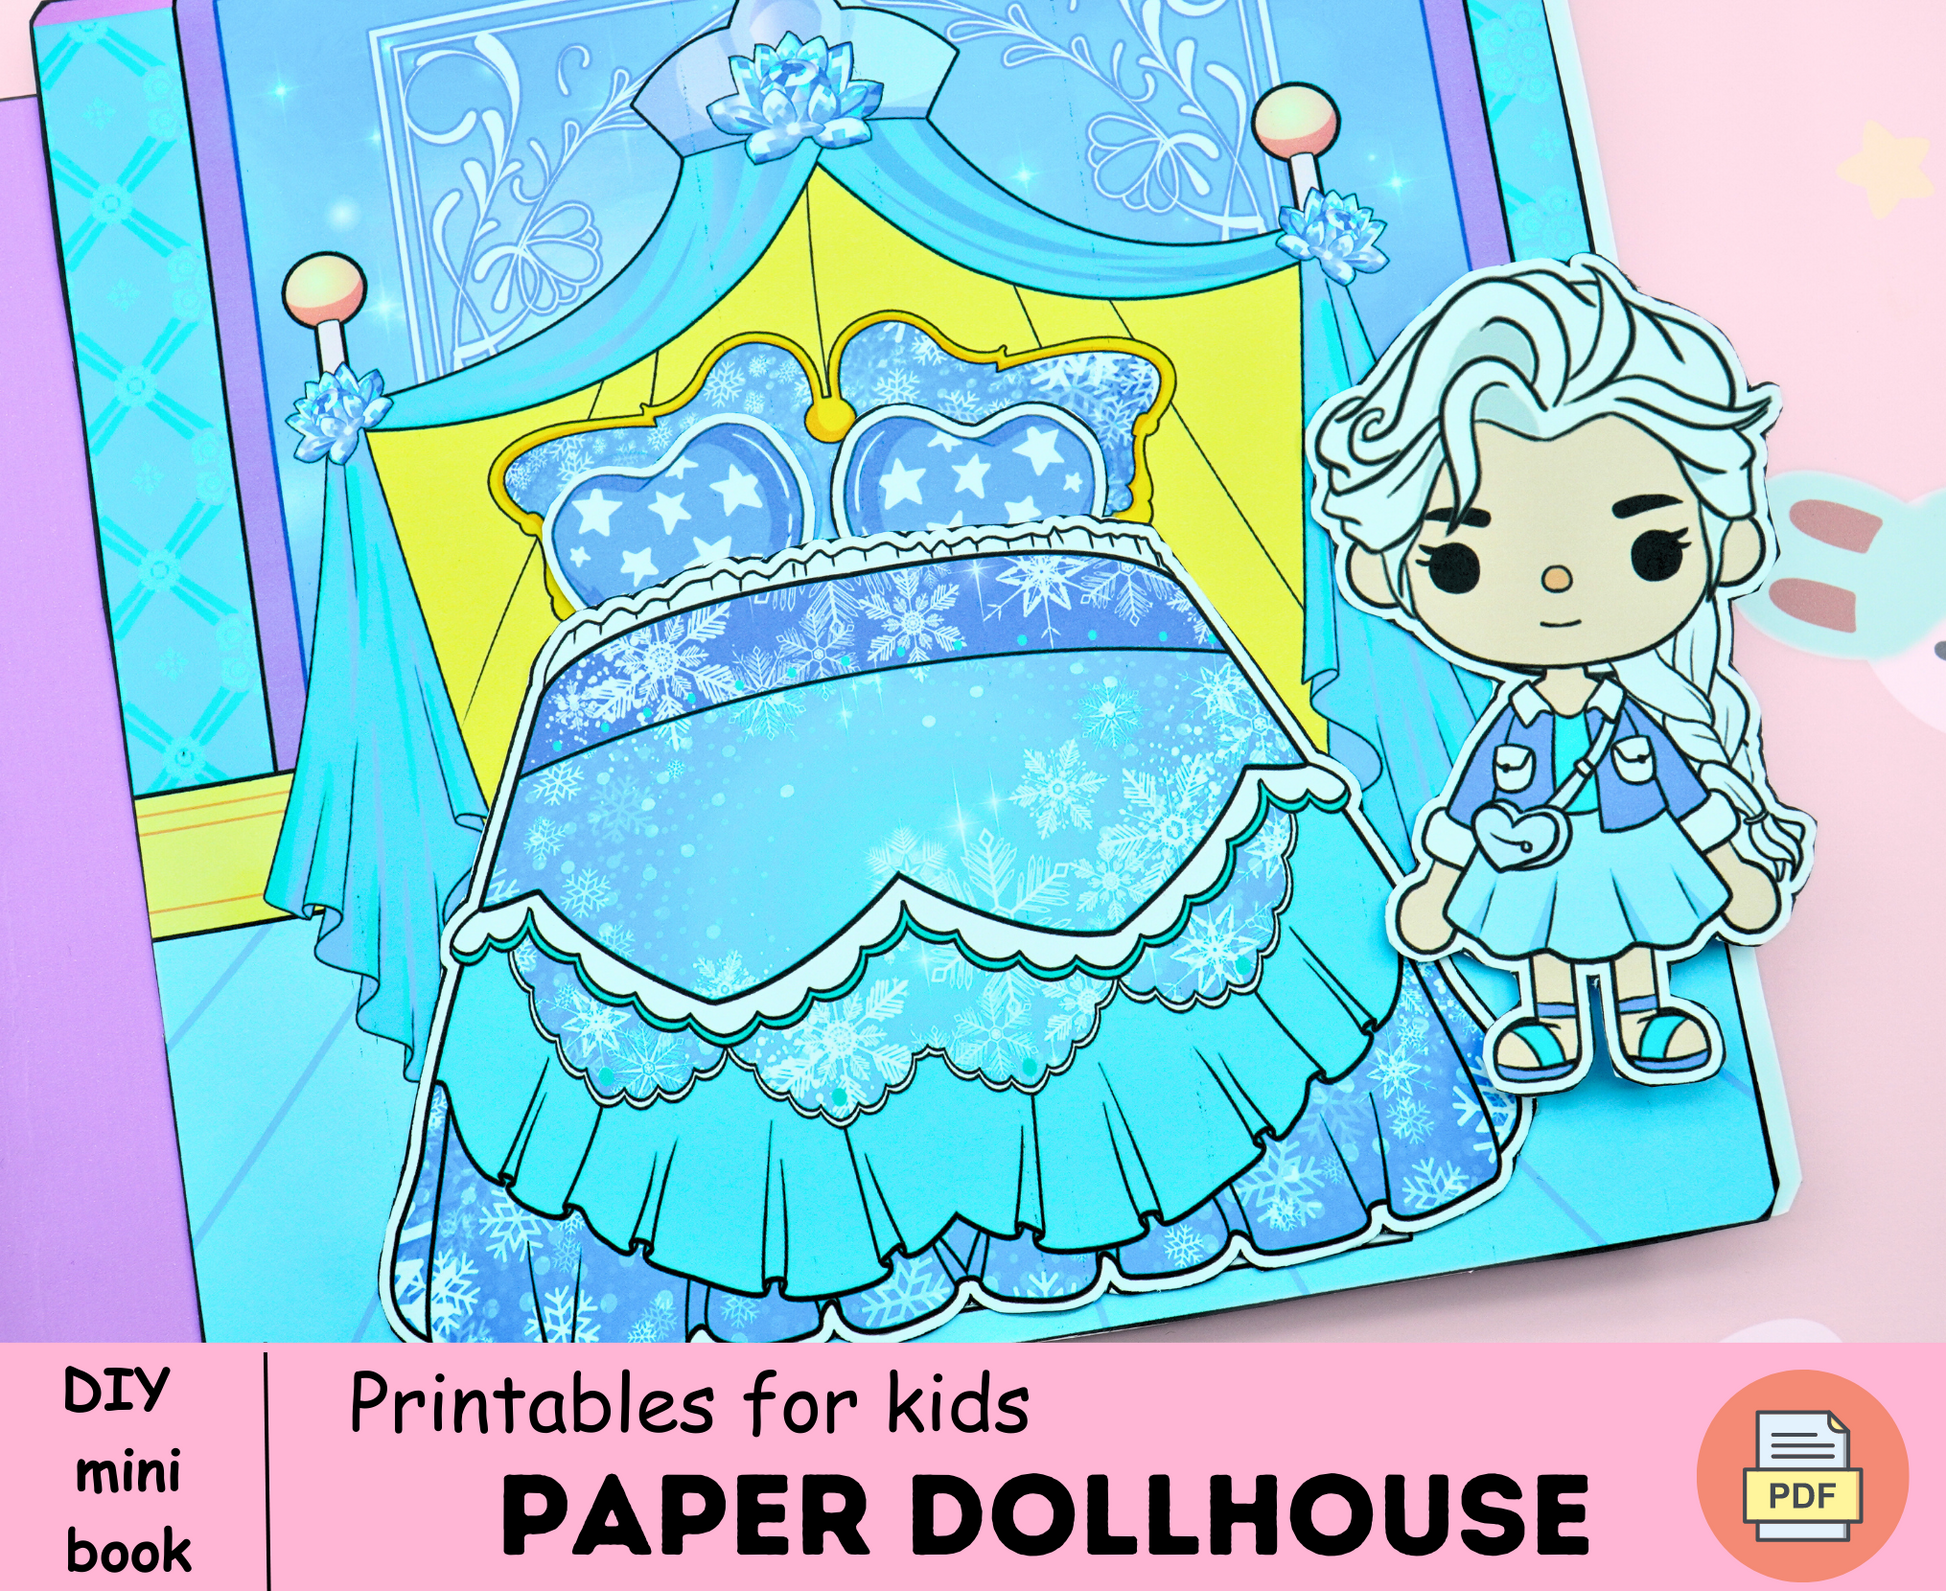 Wednesday Toca Boca Paper Doll / Quiet book pages / Printable -   Portugal